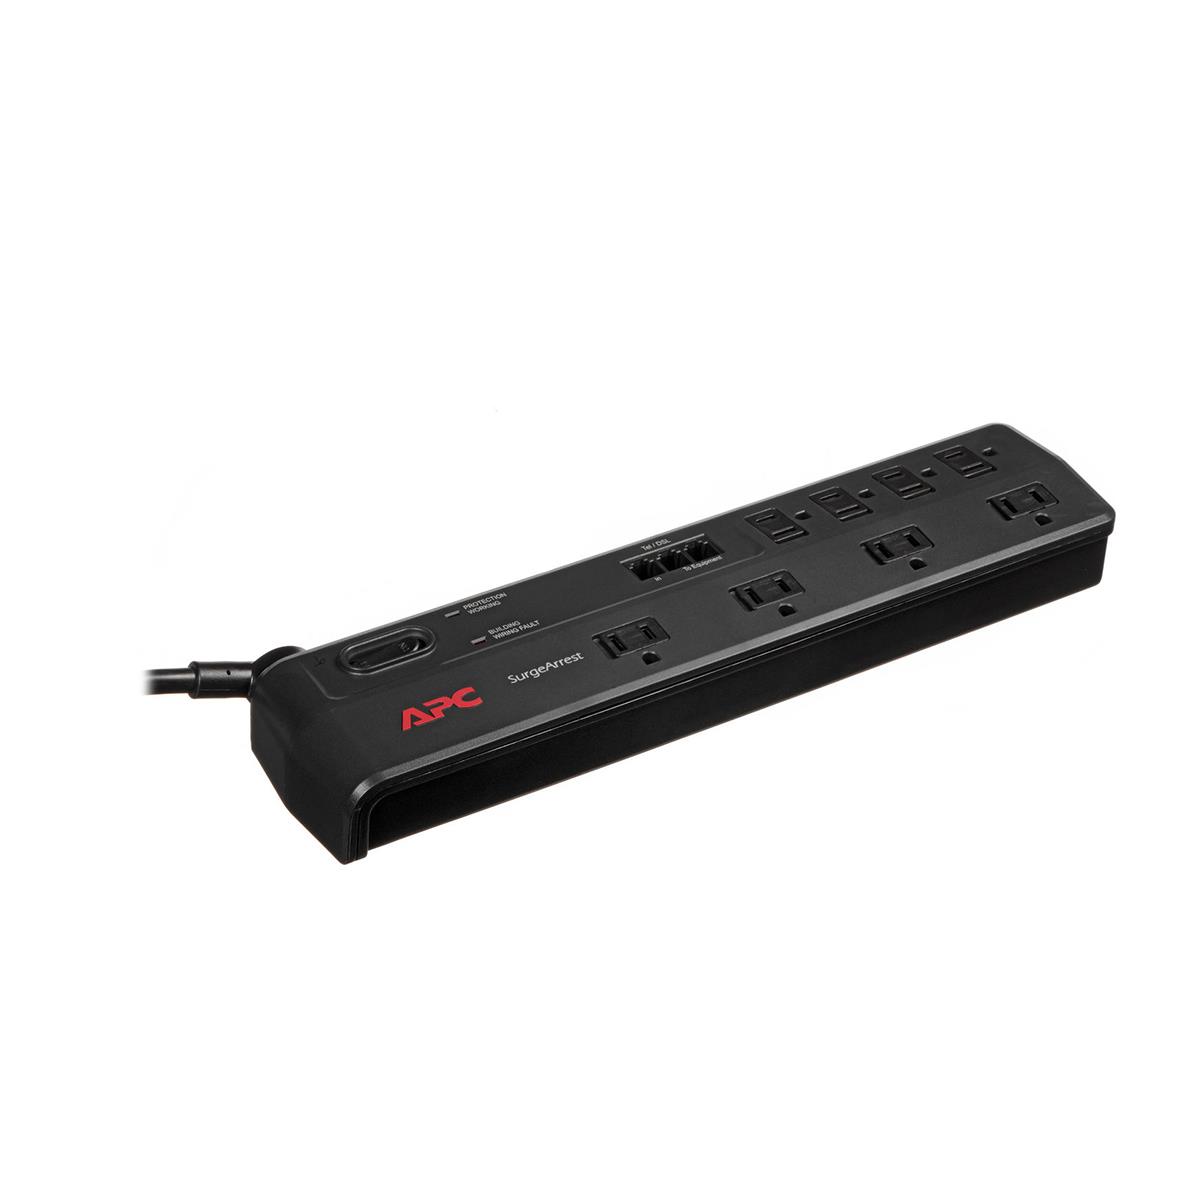 Image of American Power Conversion (APC) 8-Outlet Essential Surgearrest Surge Protector